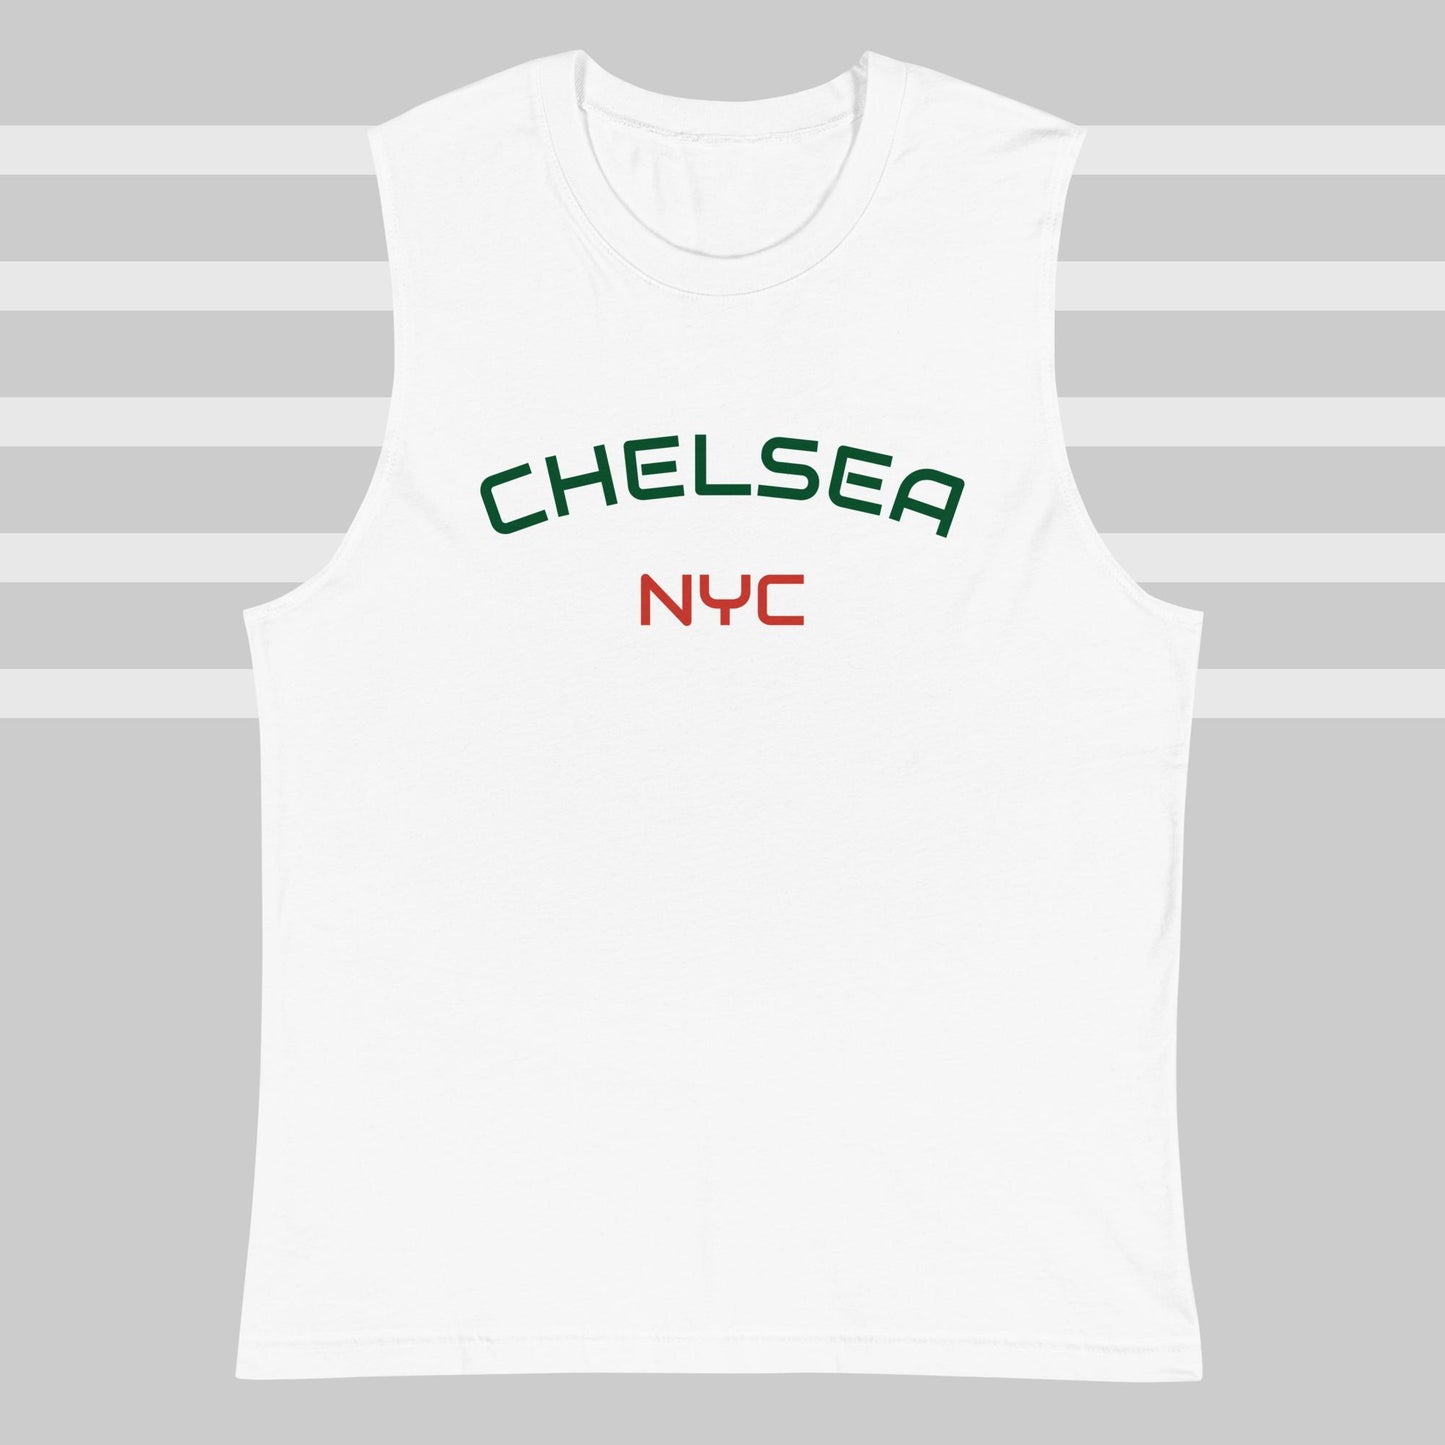 Chelsea NYC muscle shirt